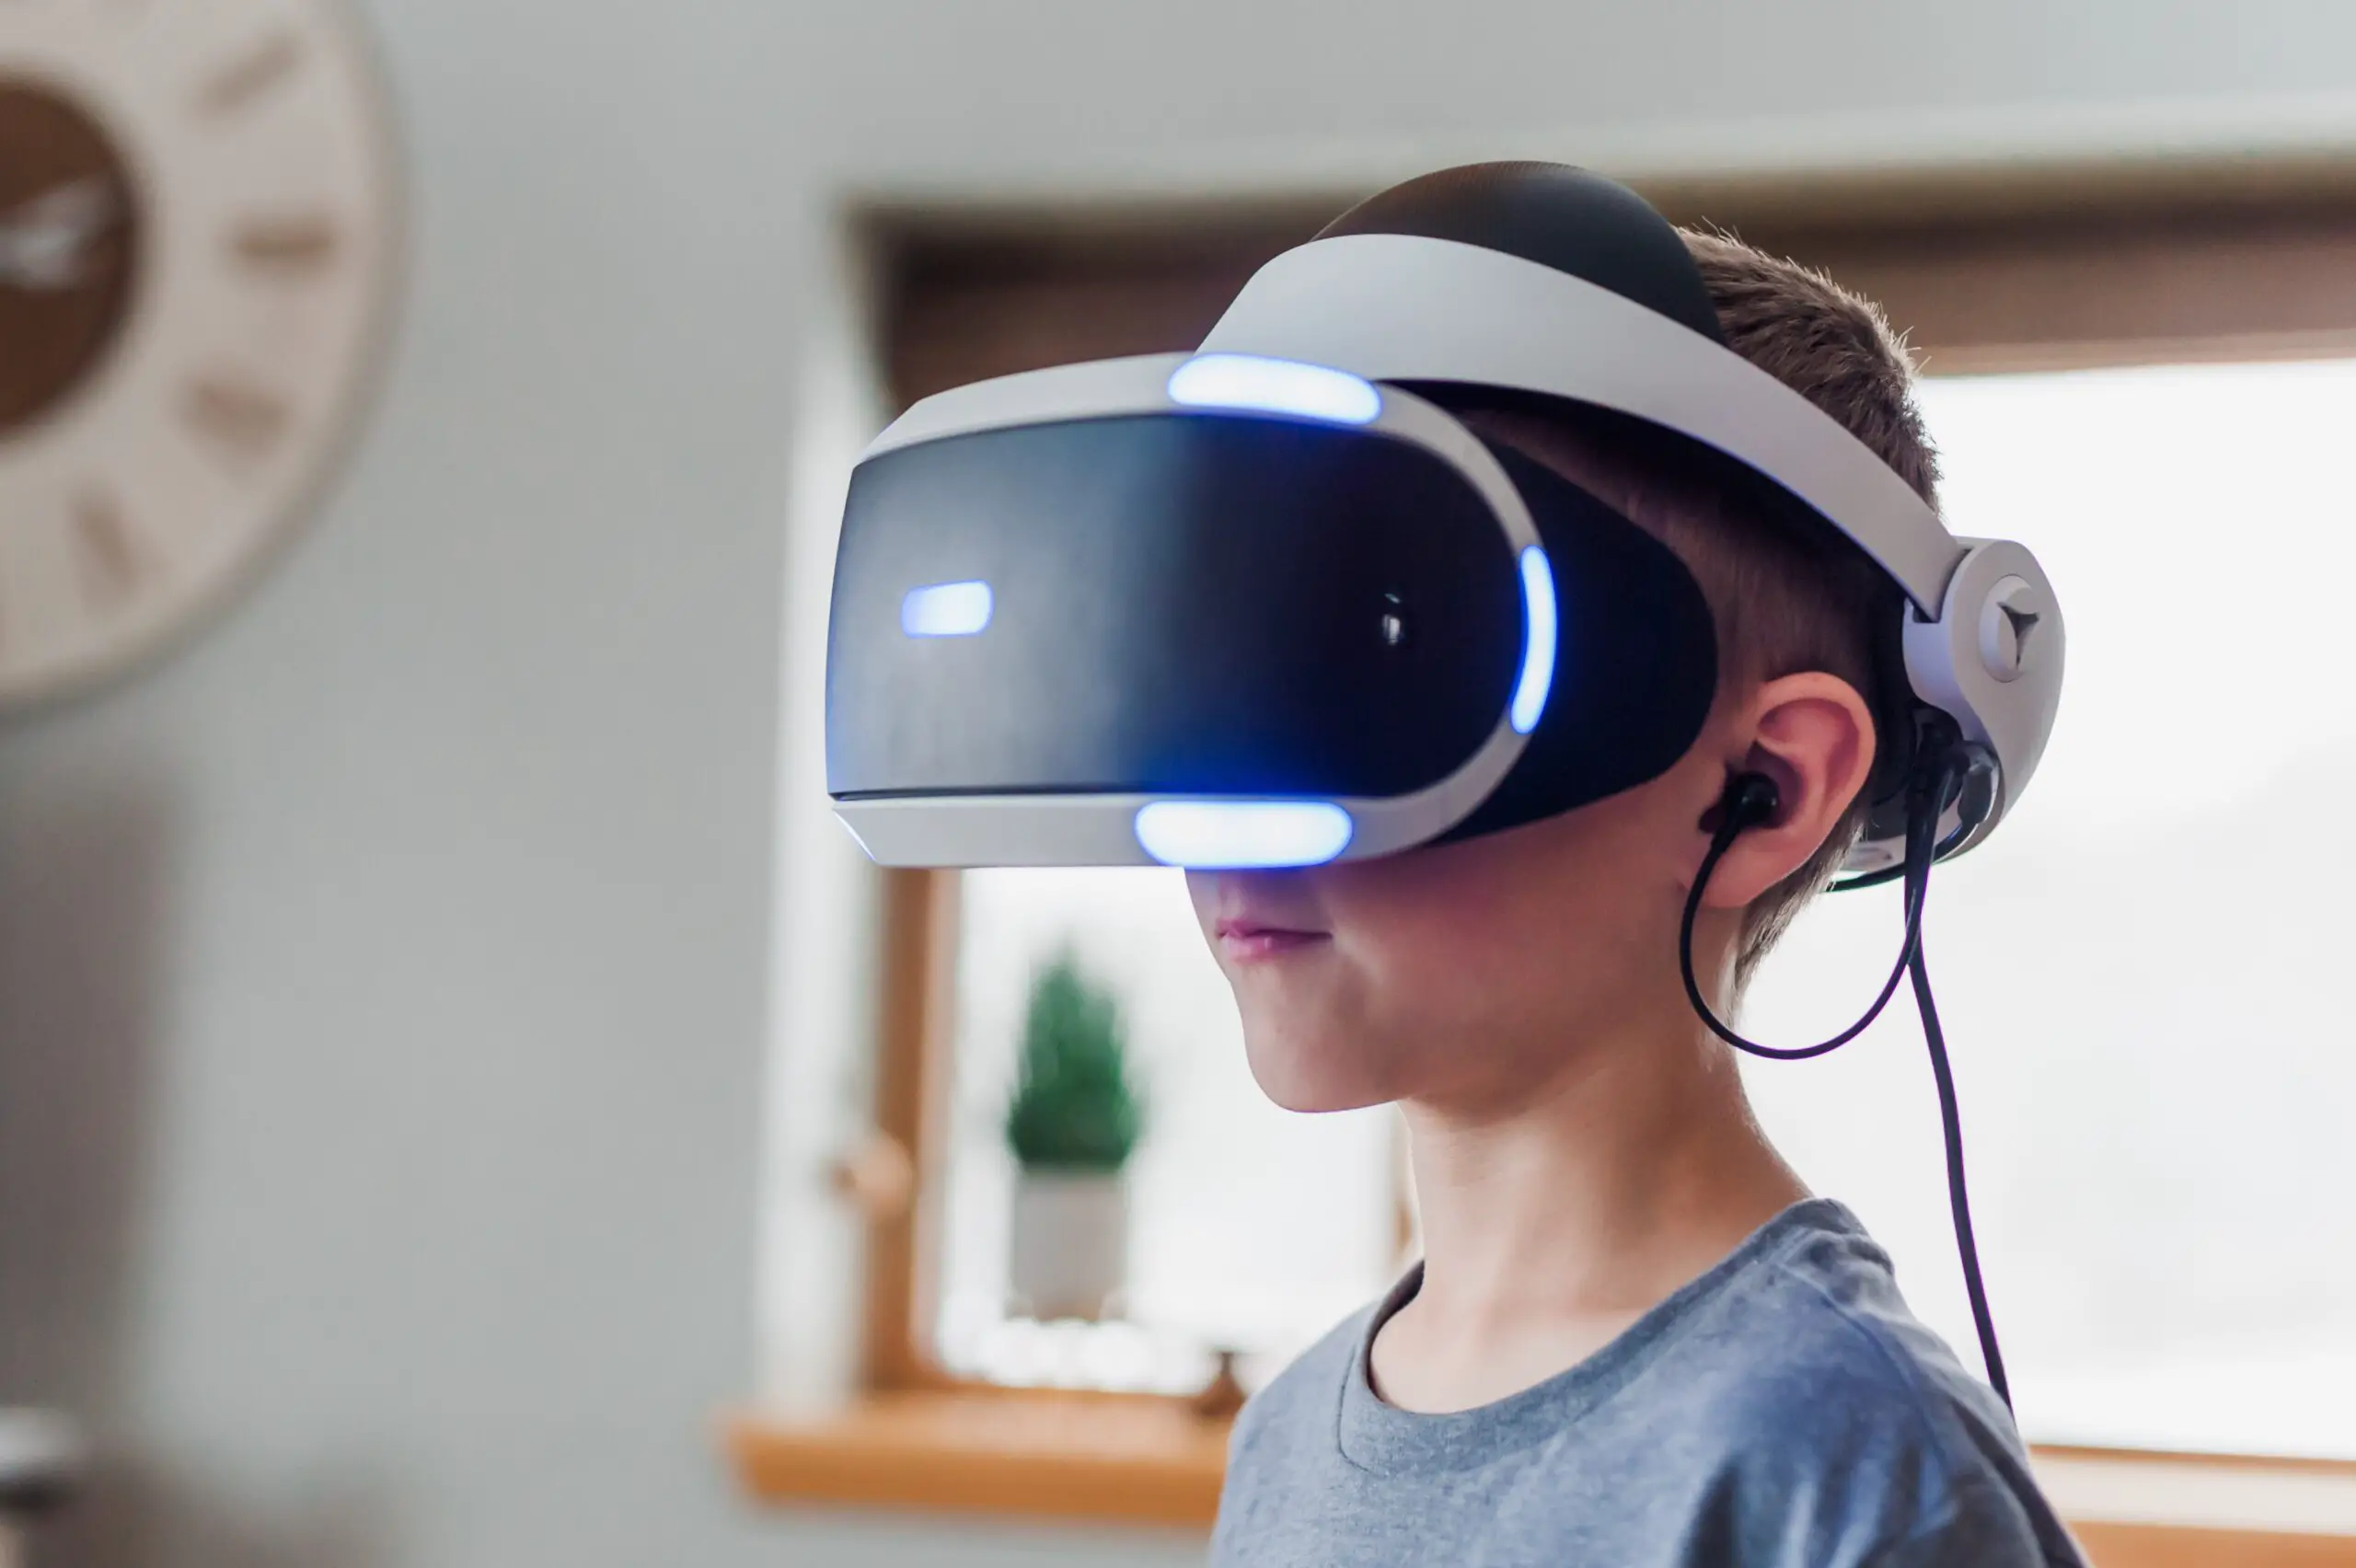 Only 4% of American teens use virtual reality on a daily basis